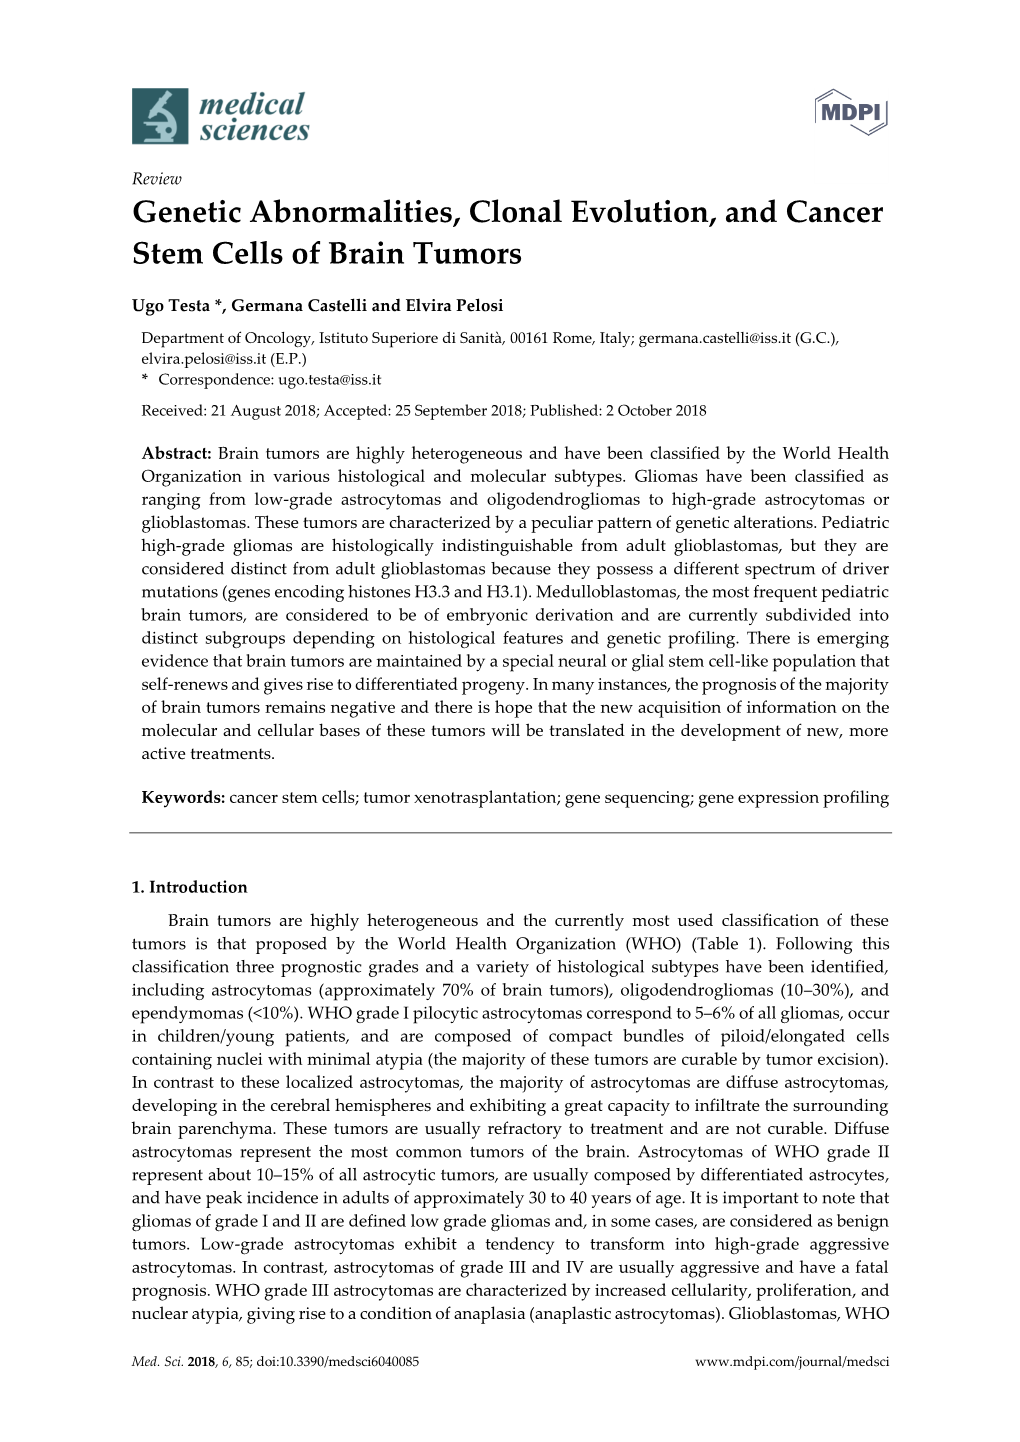 Genetic Abnormalities, Clonal Evolution, and Cancer Stem Cells of Brain Tumors